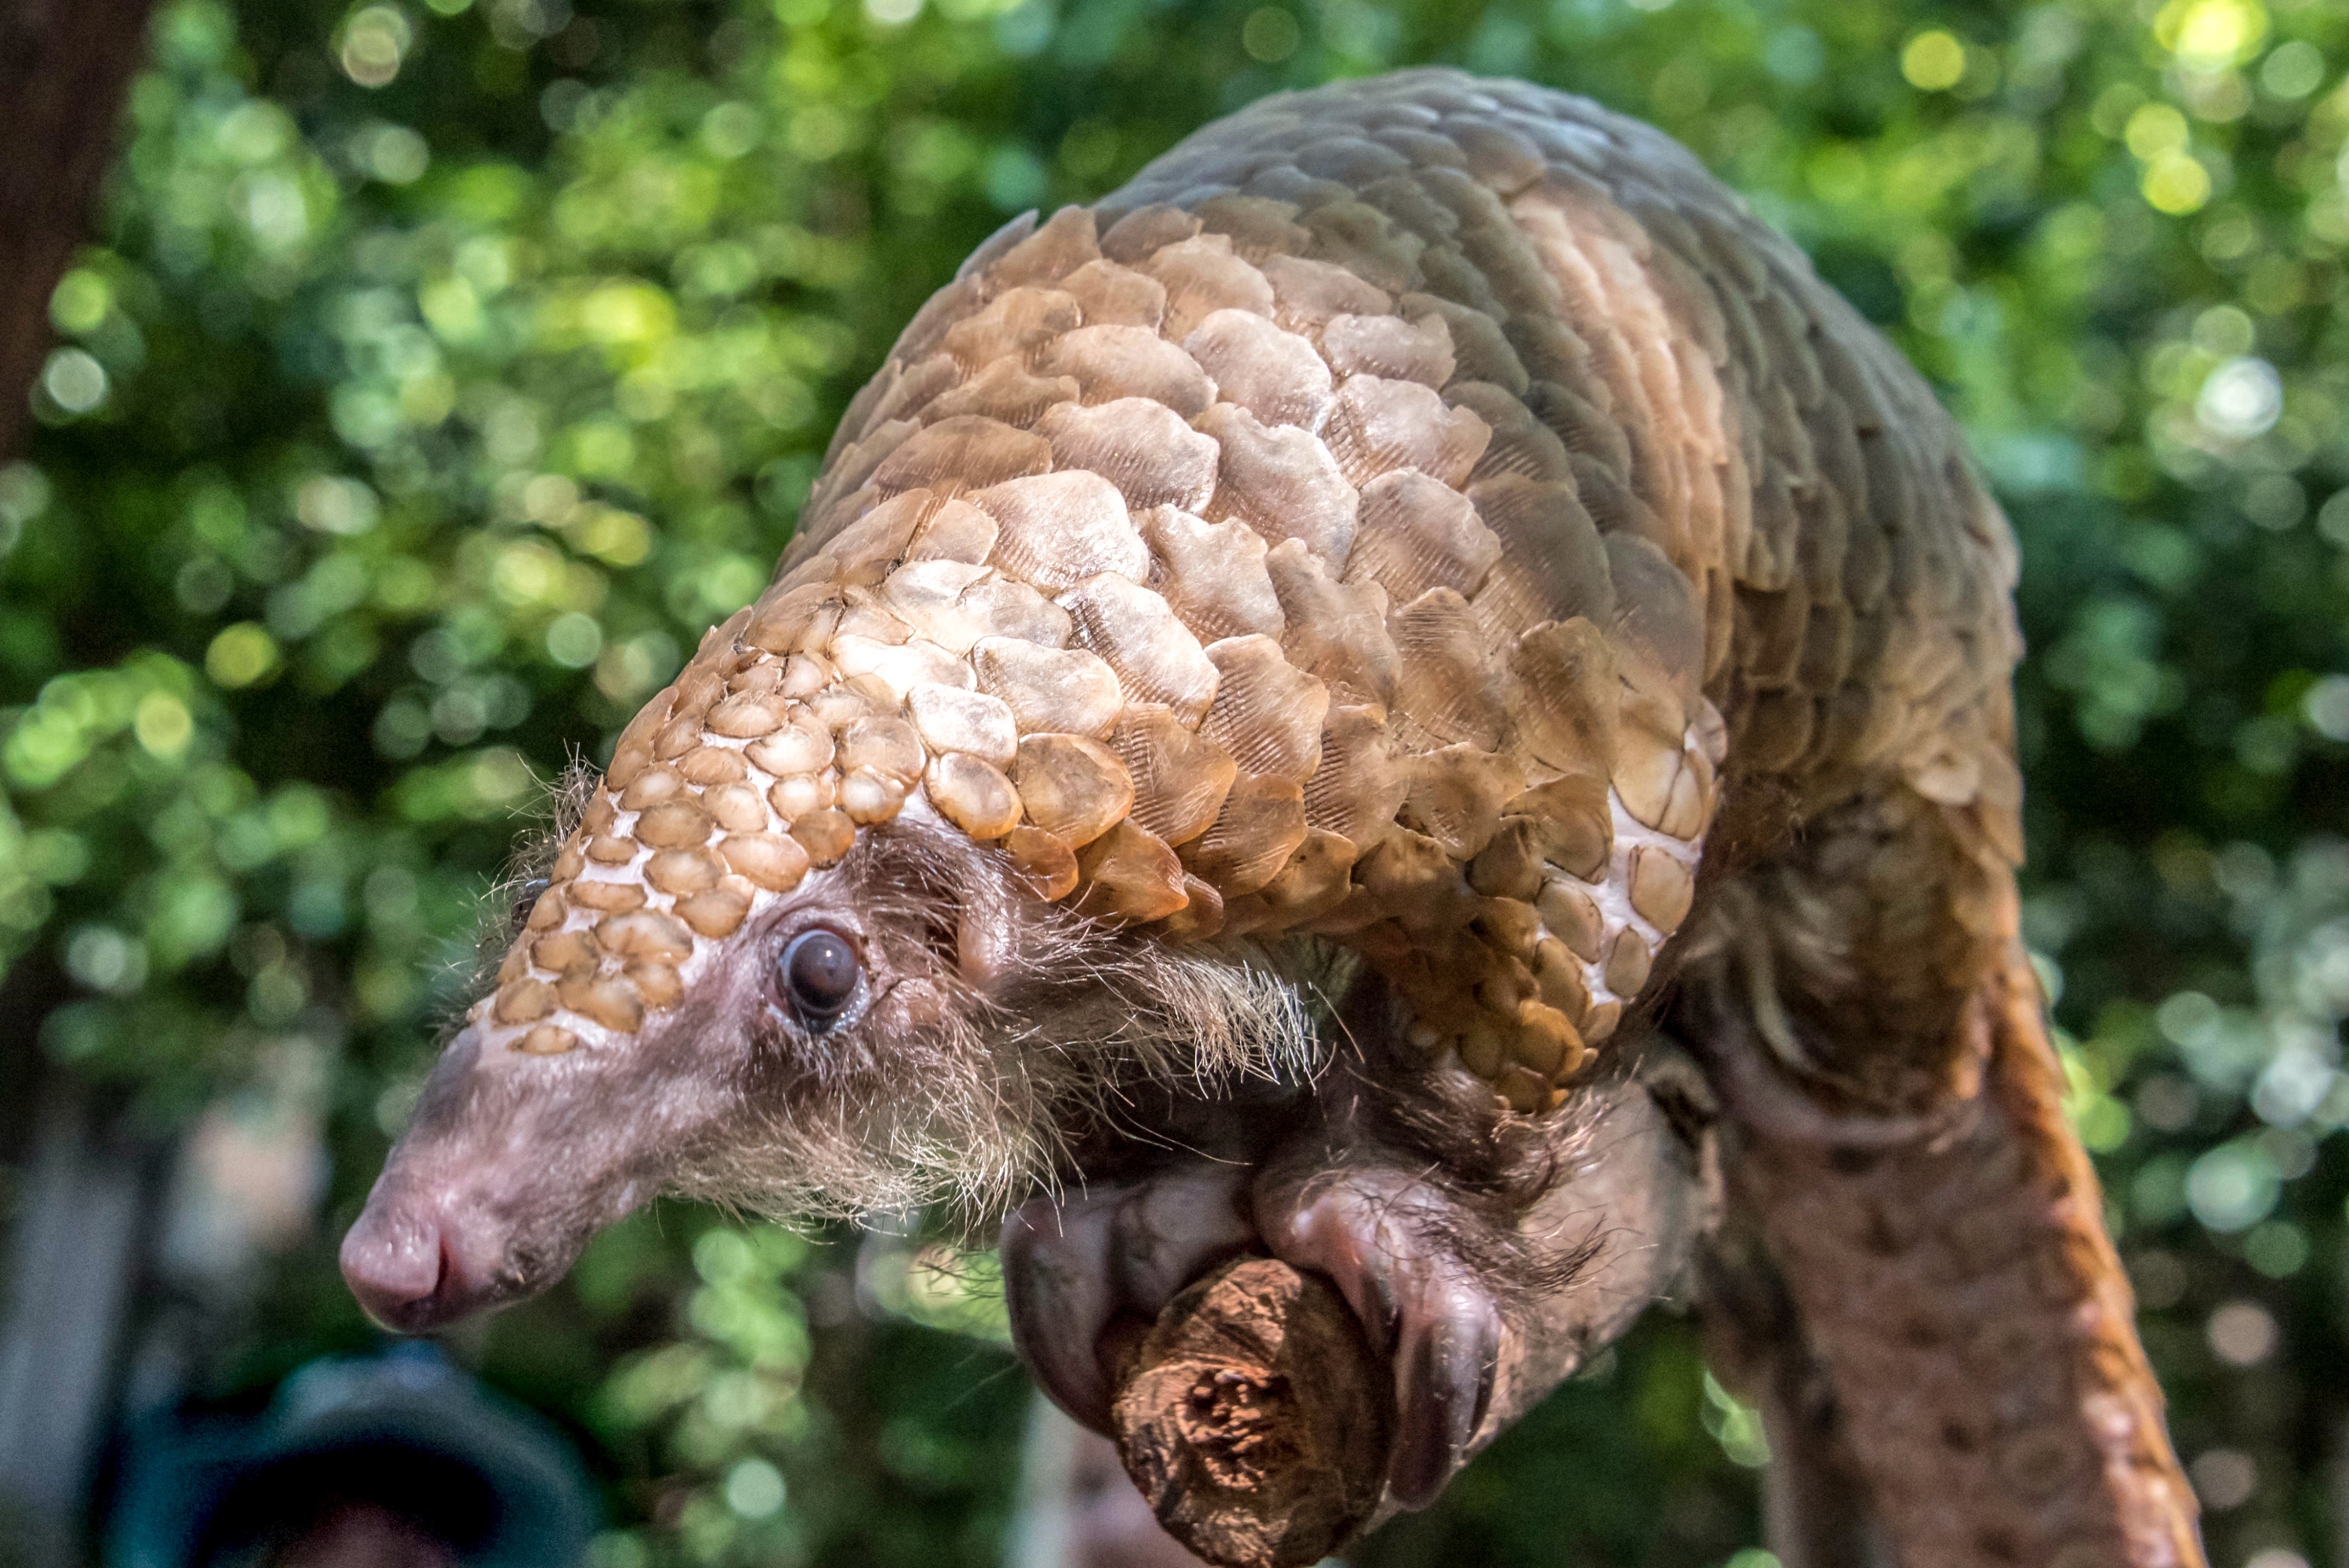 The white-bellied pangolin, which lives in West and Central Africa, is the world’s most trafficked mammal. Photo: US Fish and Wildlife Service